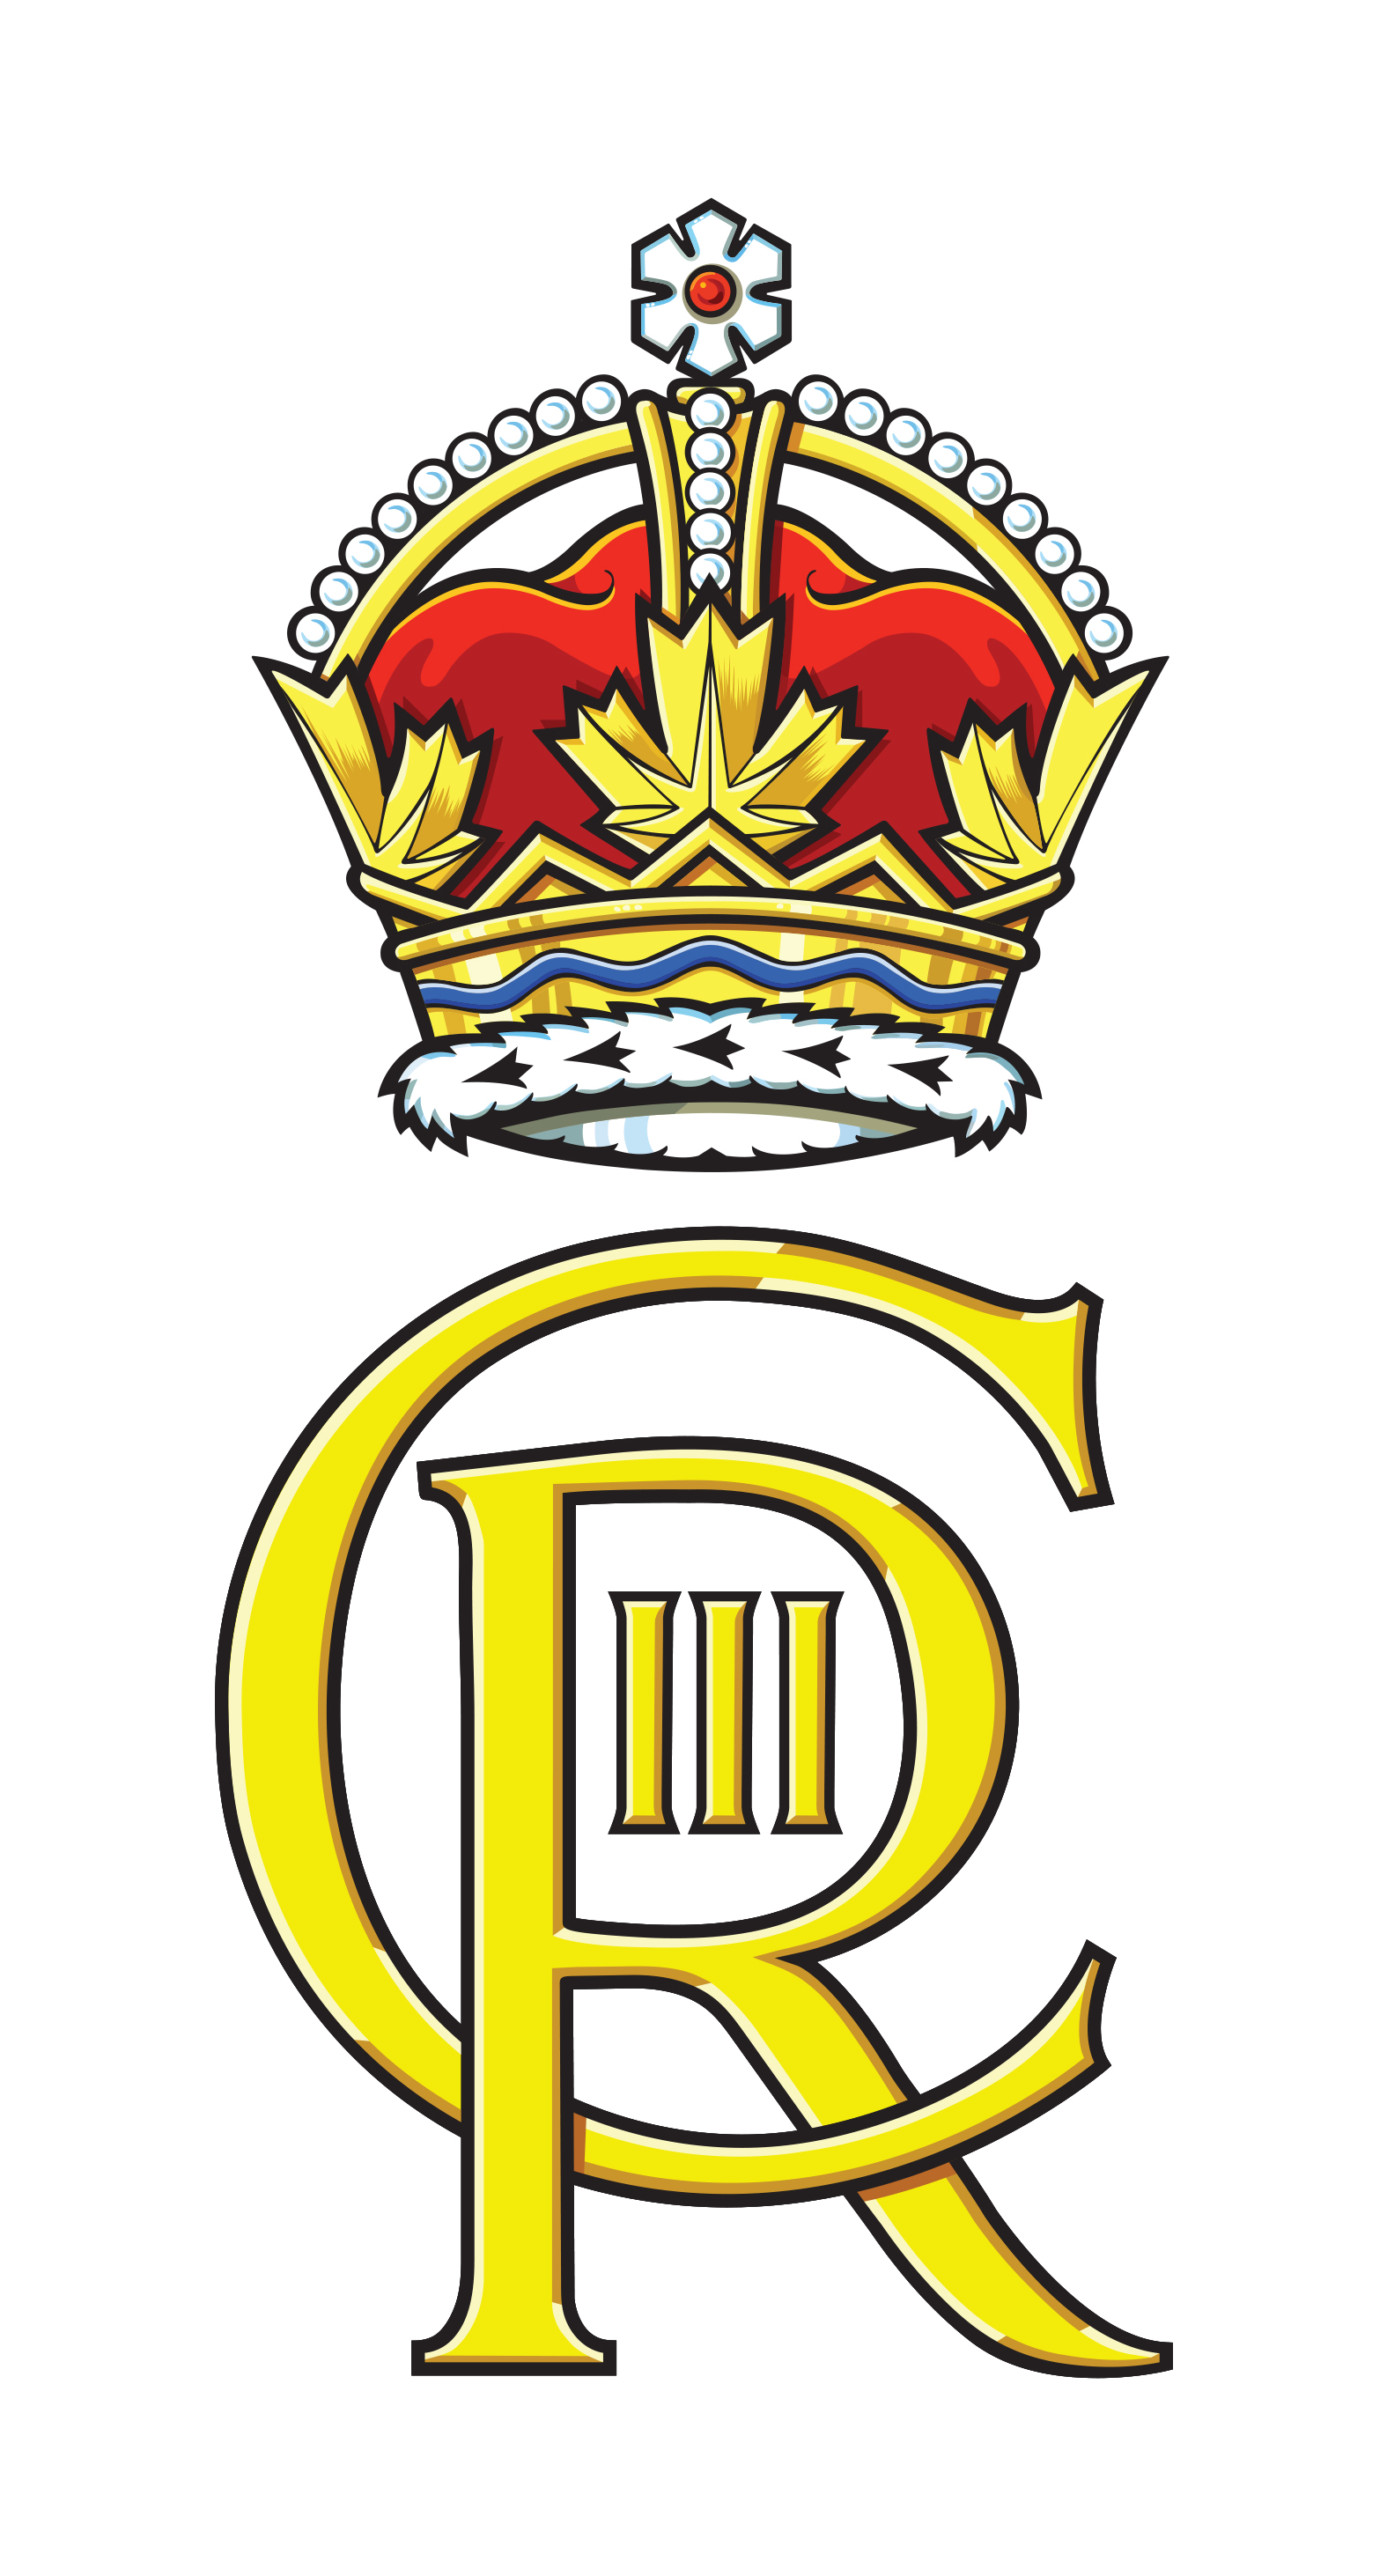 The Royal Cypher